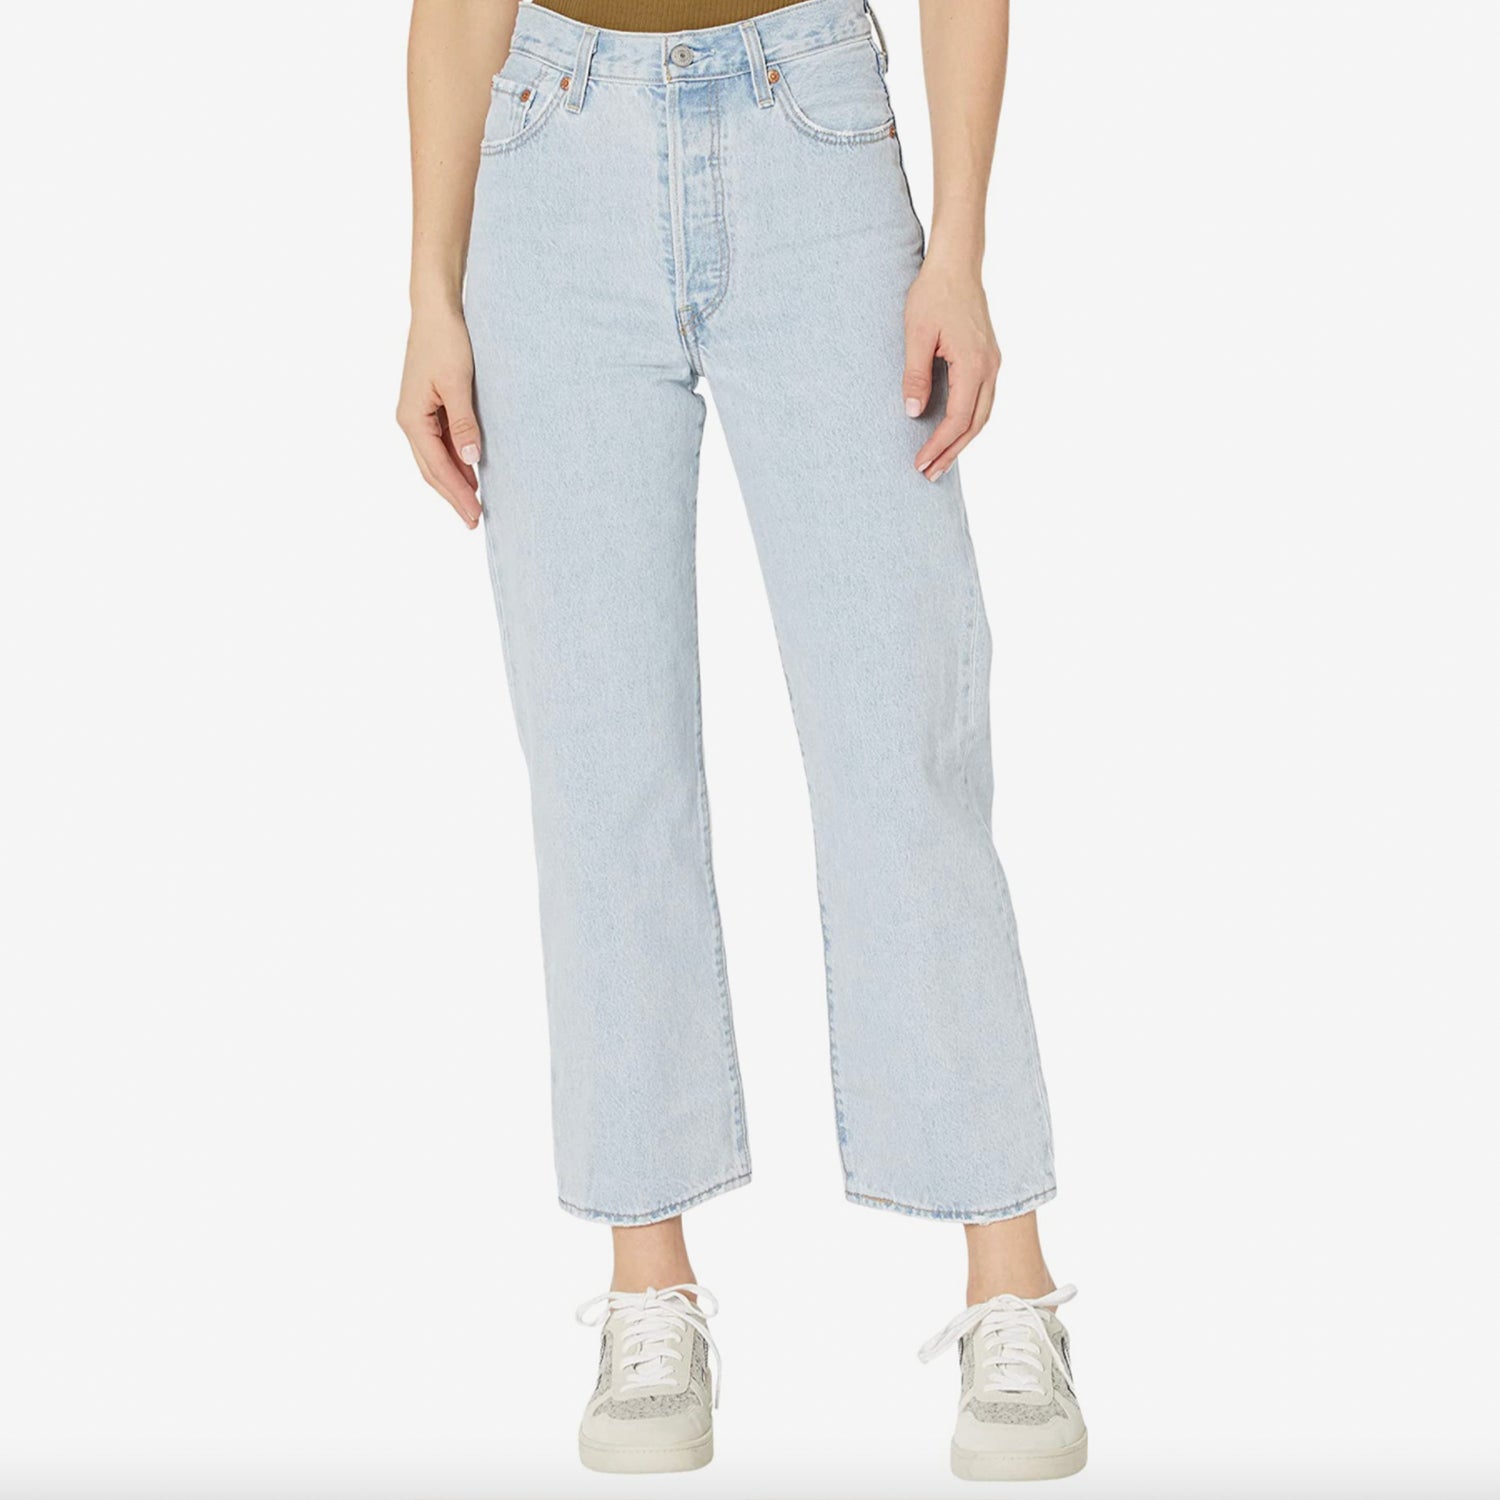 Levi's Ribcage Straight Ankle Jean. Want a pair of jeans you'll always look good in? These Levi's are just the pair! They feature a high rise with a classic straight leg. The iconic leather patch still sits at the back waist with a five-pocket construction and button and zip-fly closure